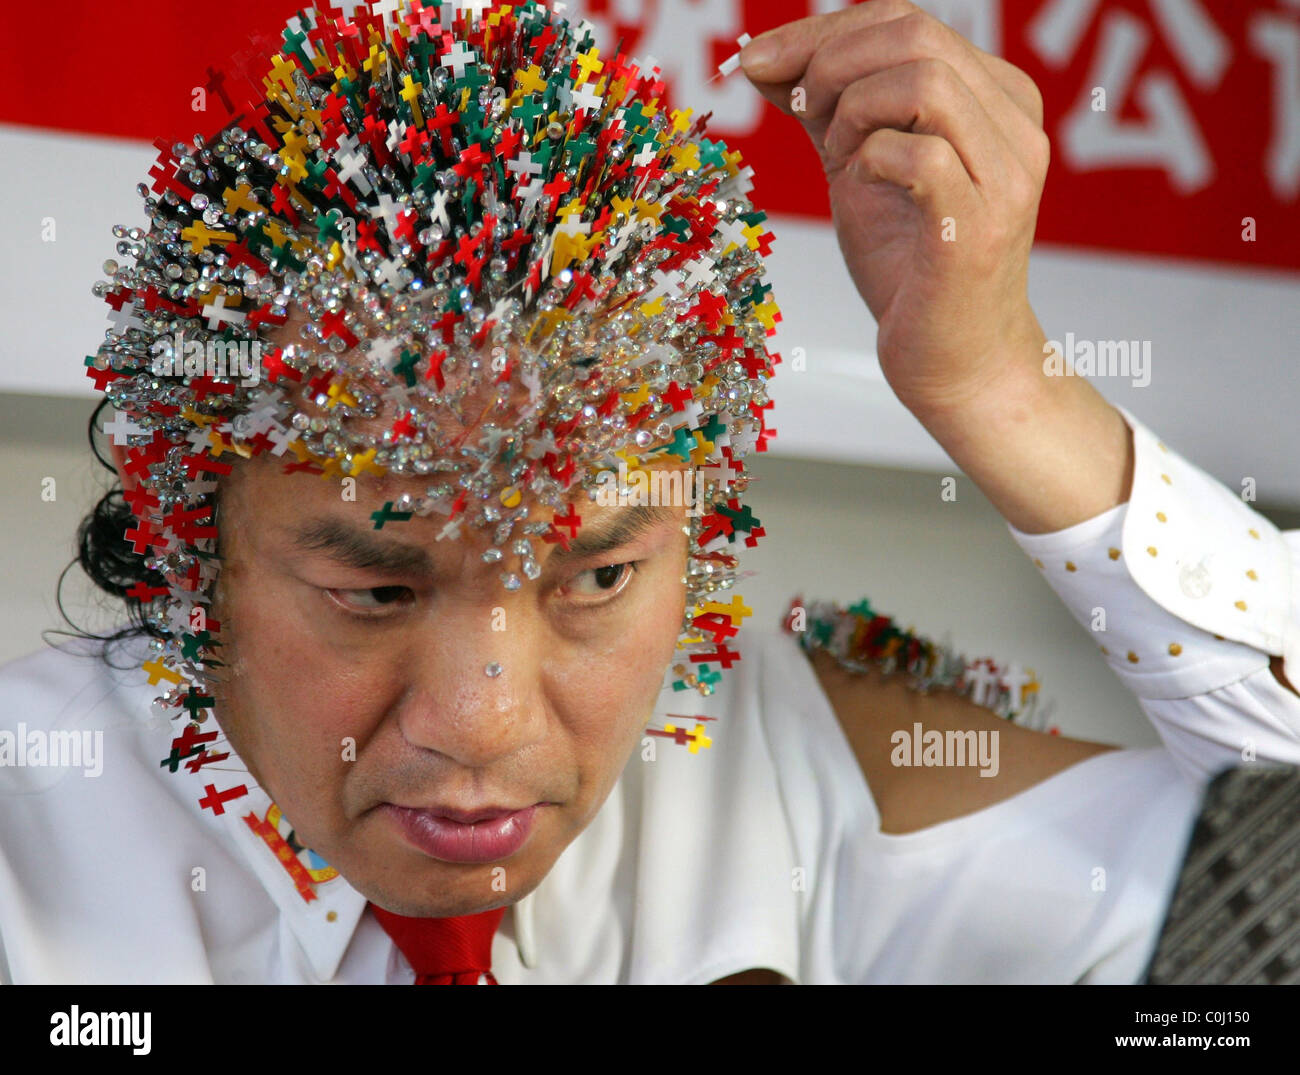 RECORD BREAKER GETS THE NEEDLE For any normal person, this stunt would be a  right pain - but not for Wei Shengchu. Shengchu Stock Photo - Alamy